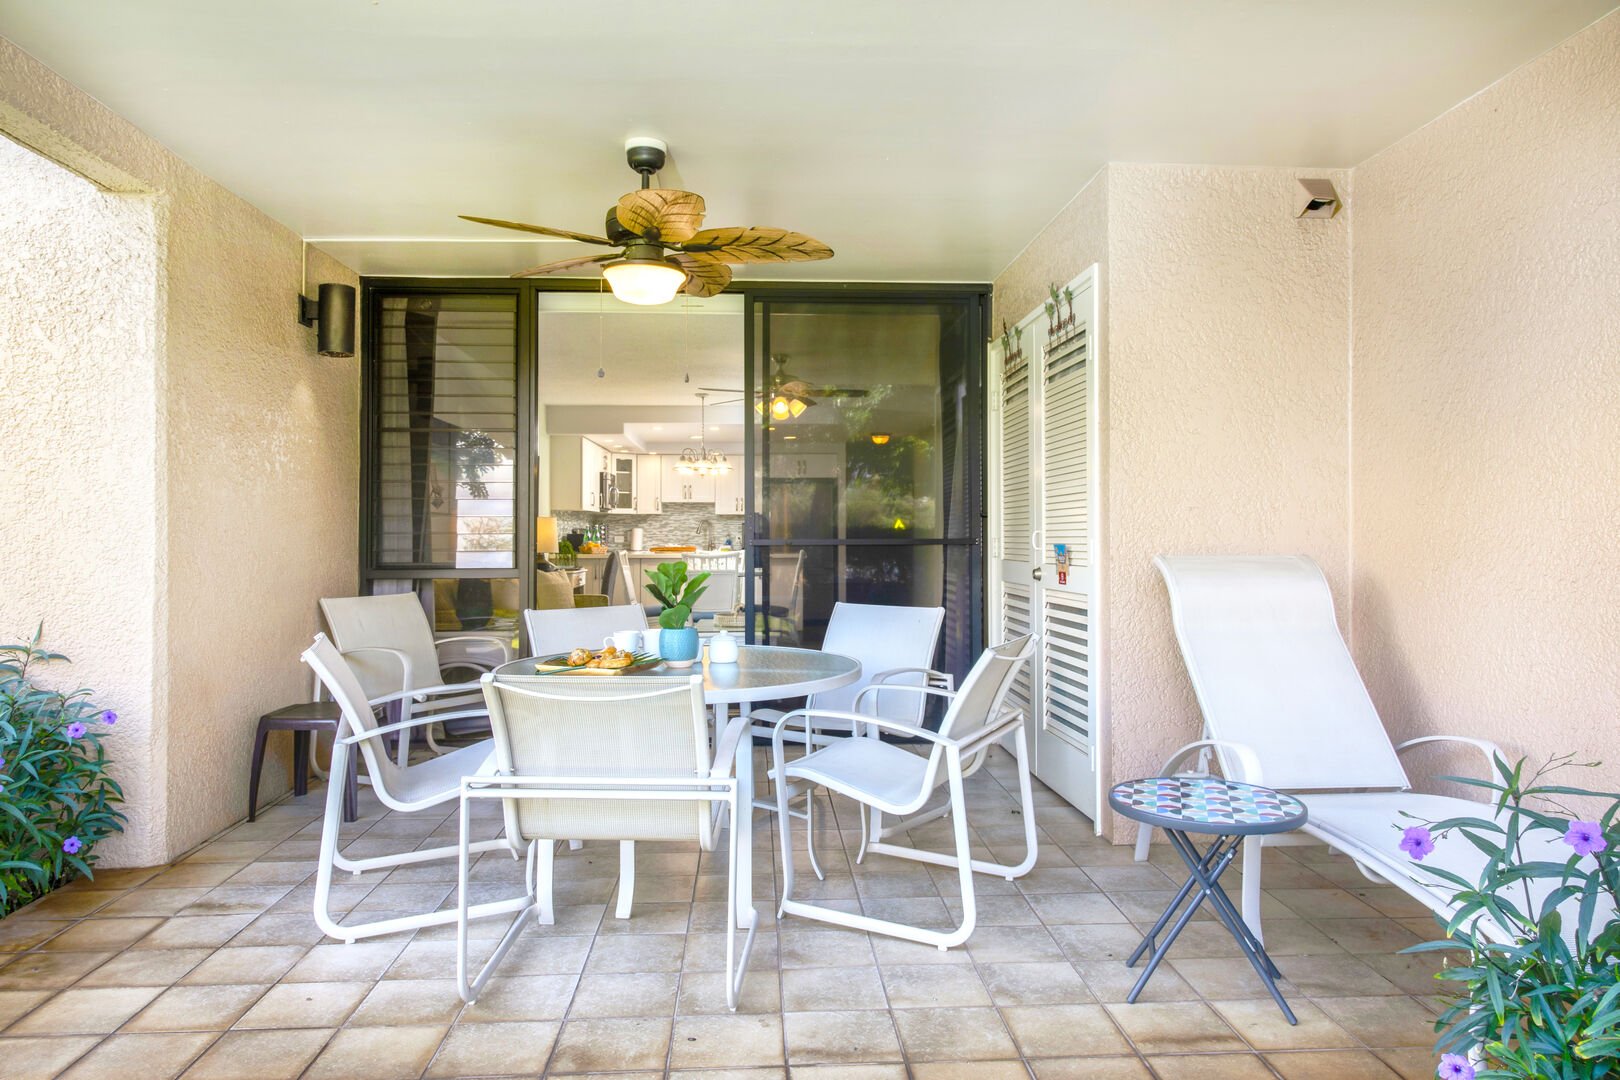 Enjoy your morning coffee or breakfast outside while looking at the beautiful garden view!